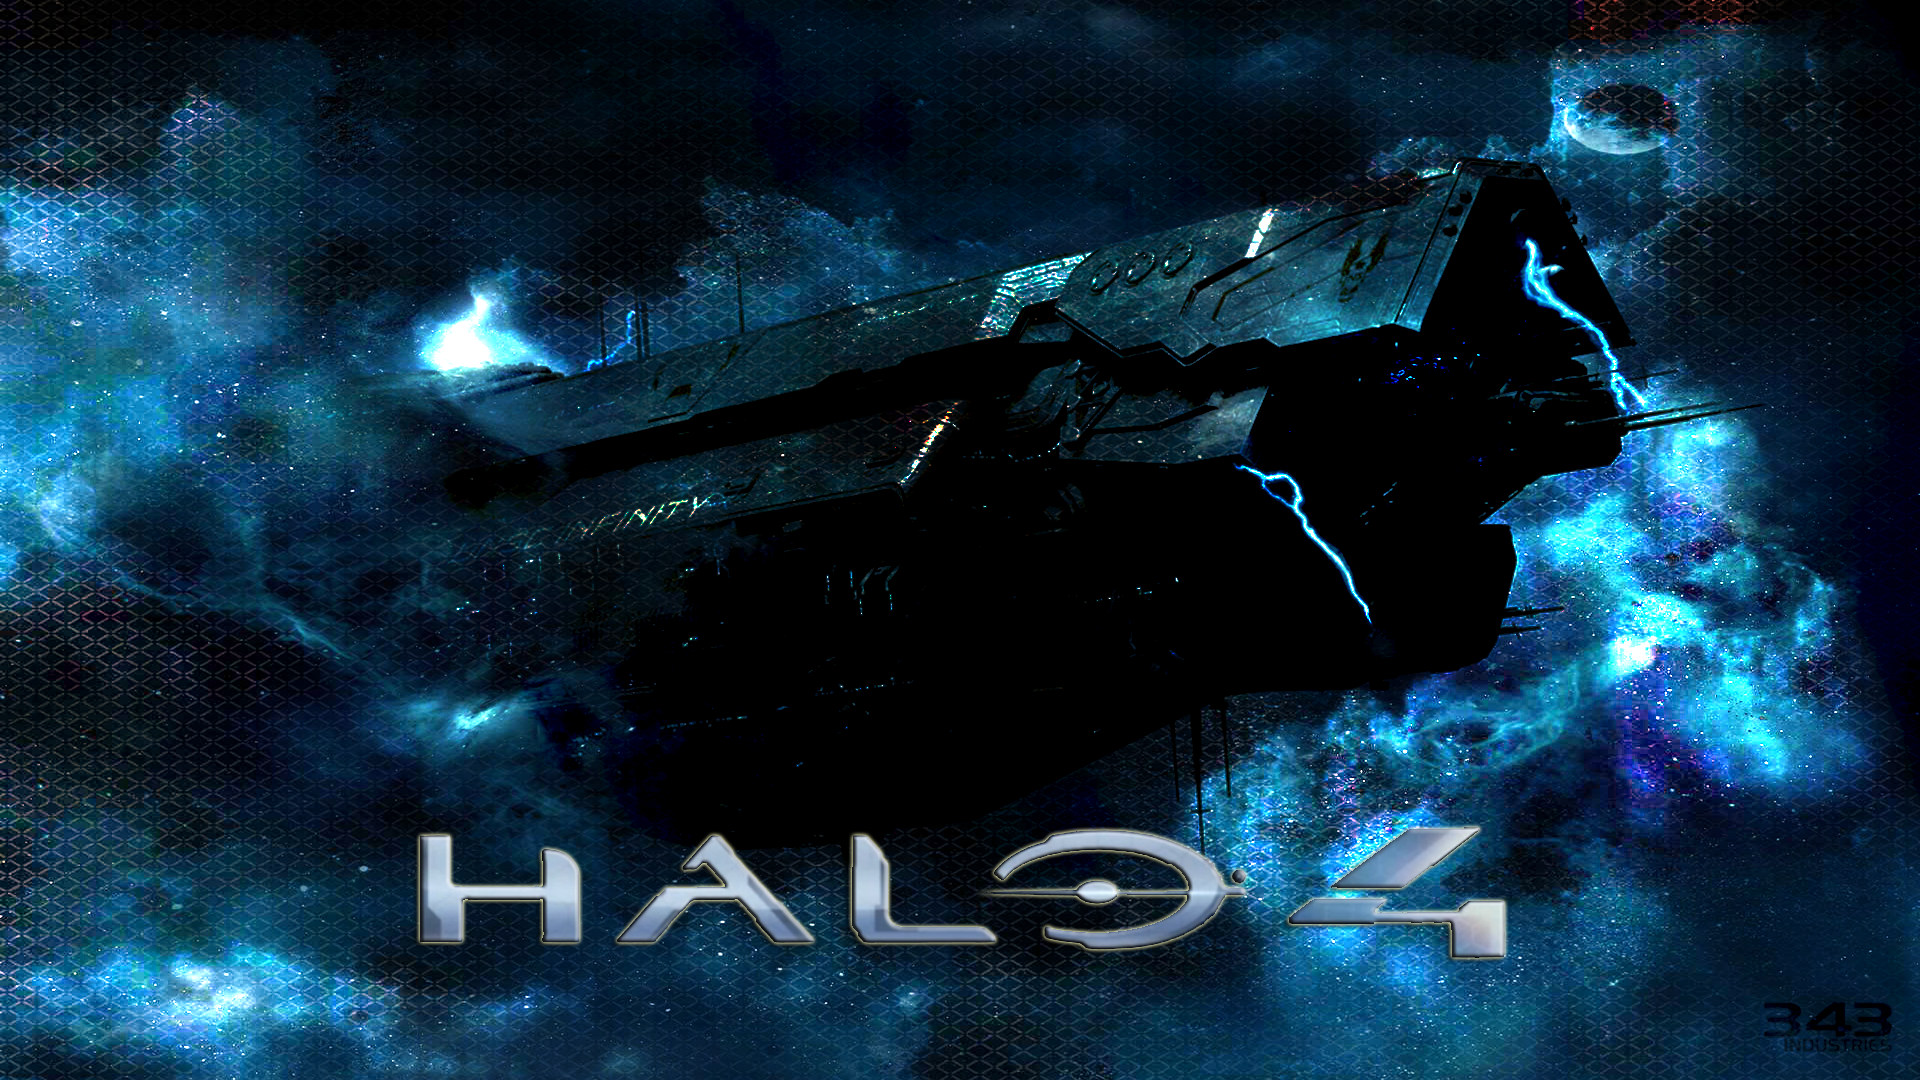 Cool Video Game Wallpapers Halowallpapers Halo Campaign